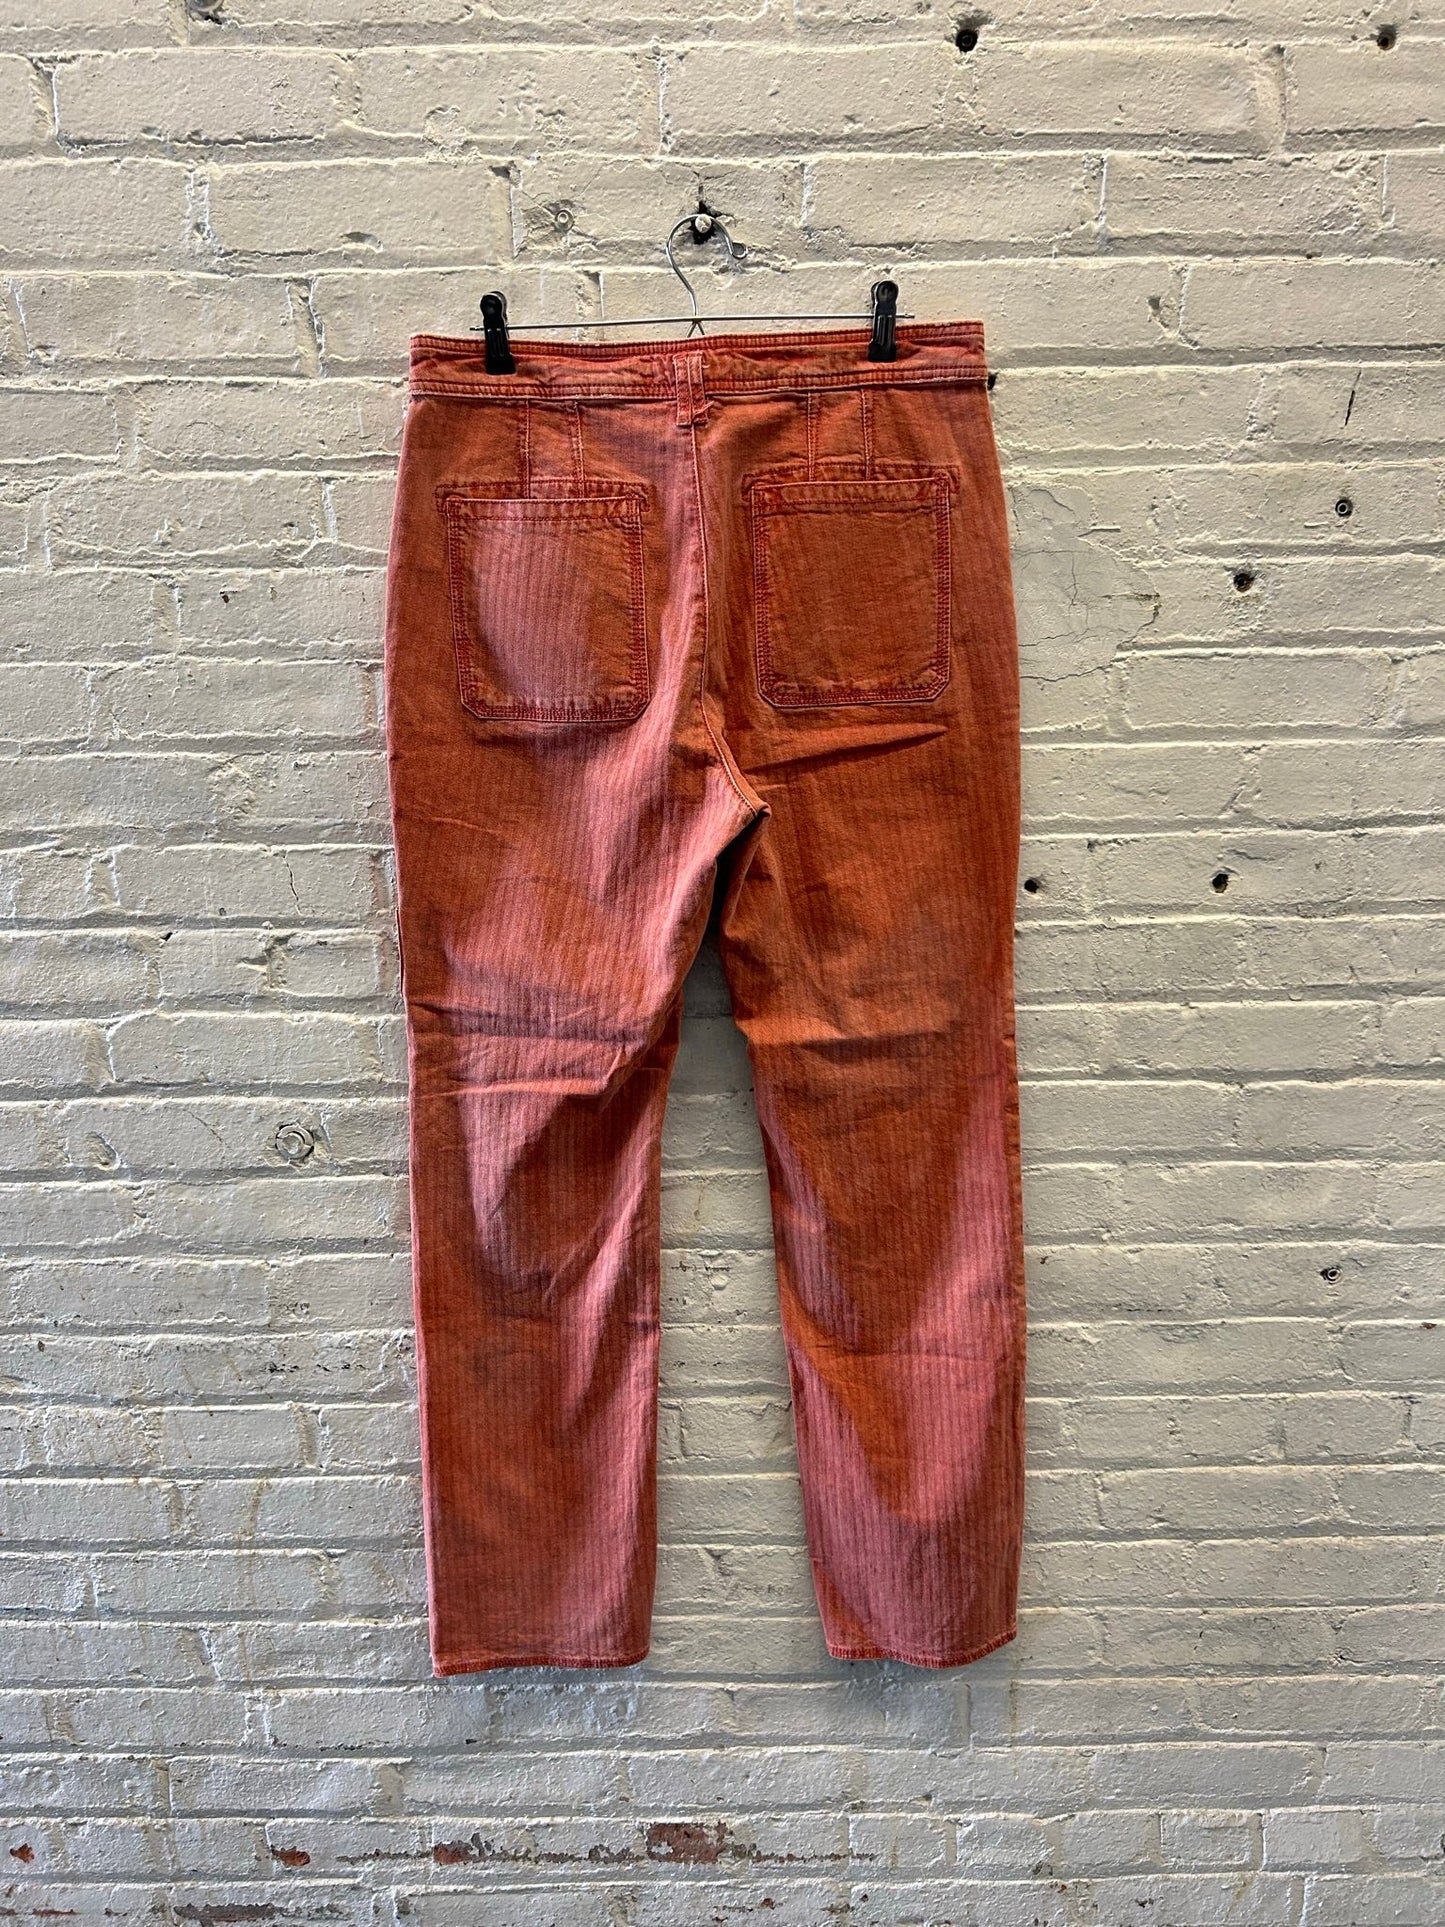 Anthropologie Red Work Pants